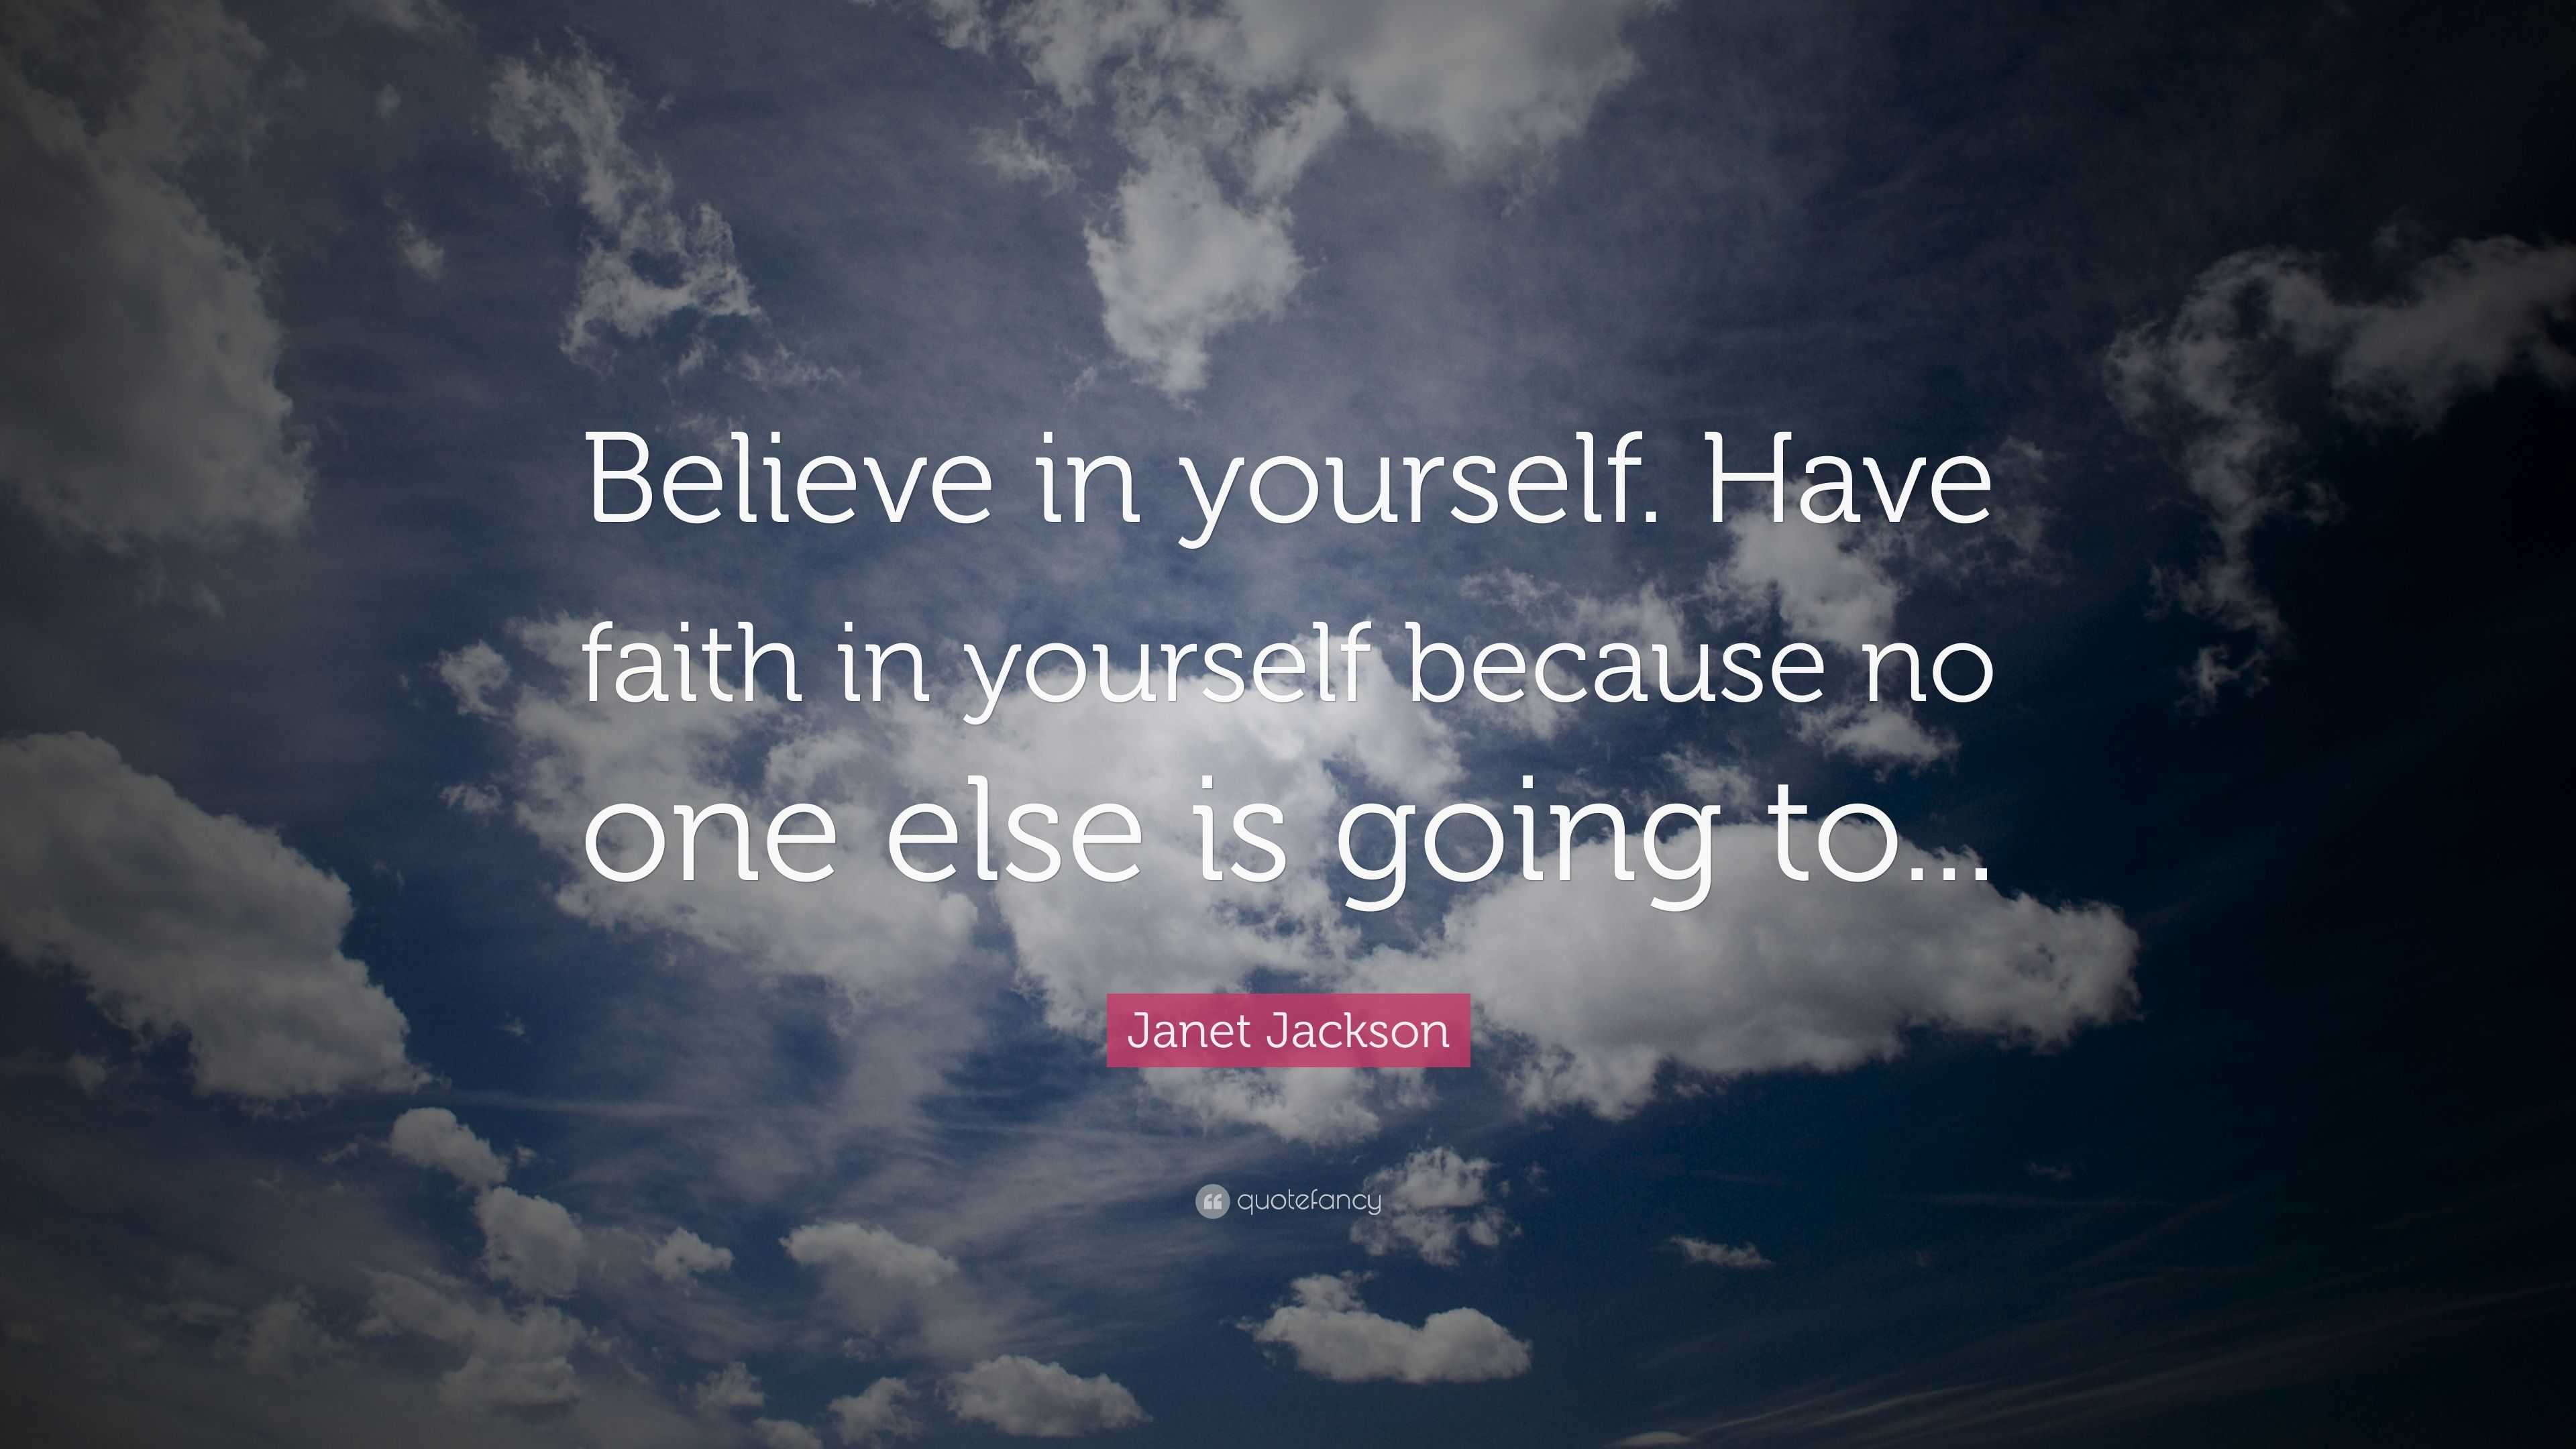 Janet Jackson Quote: “Believe in yourself. Have faith in yourself